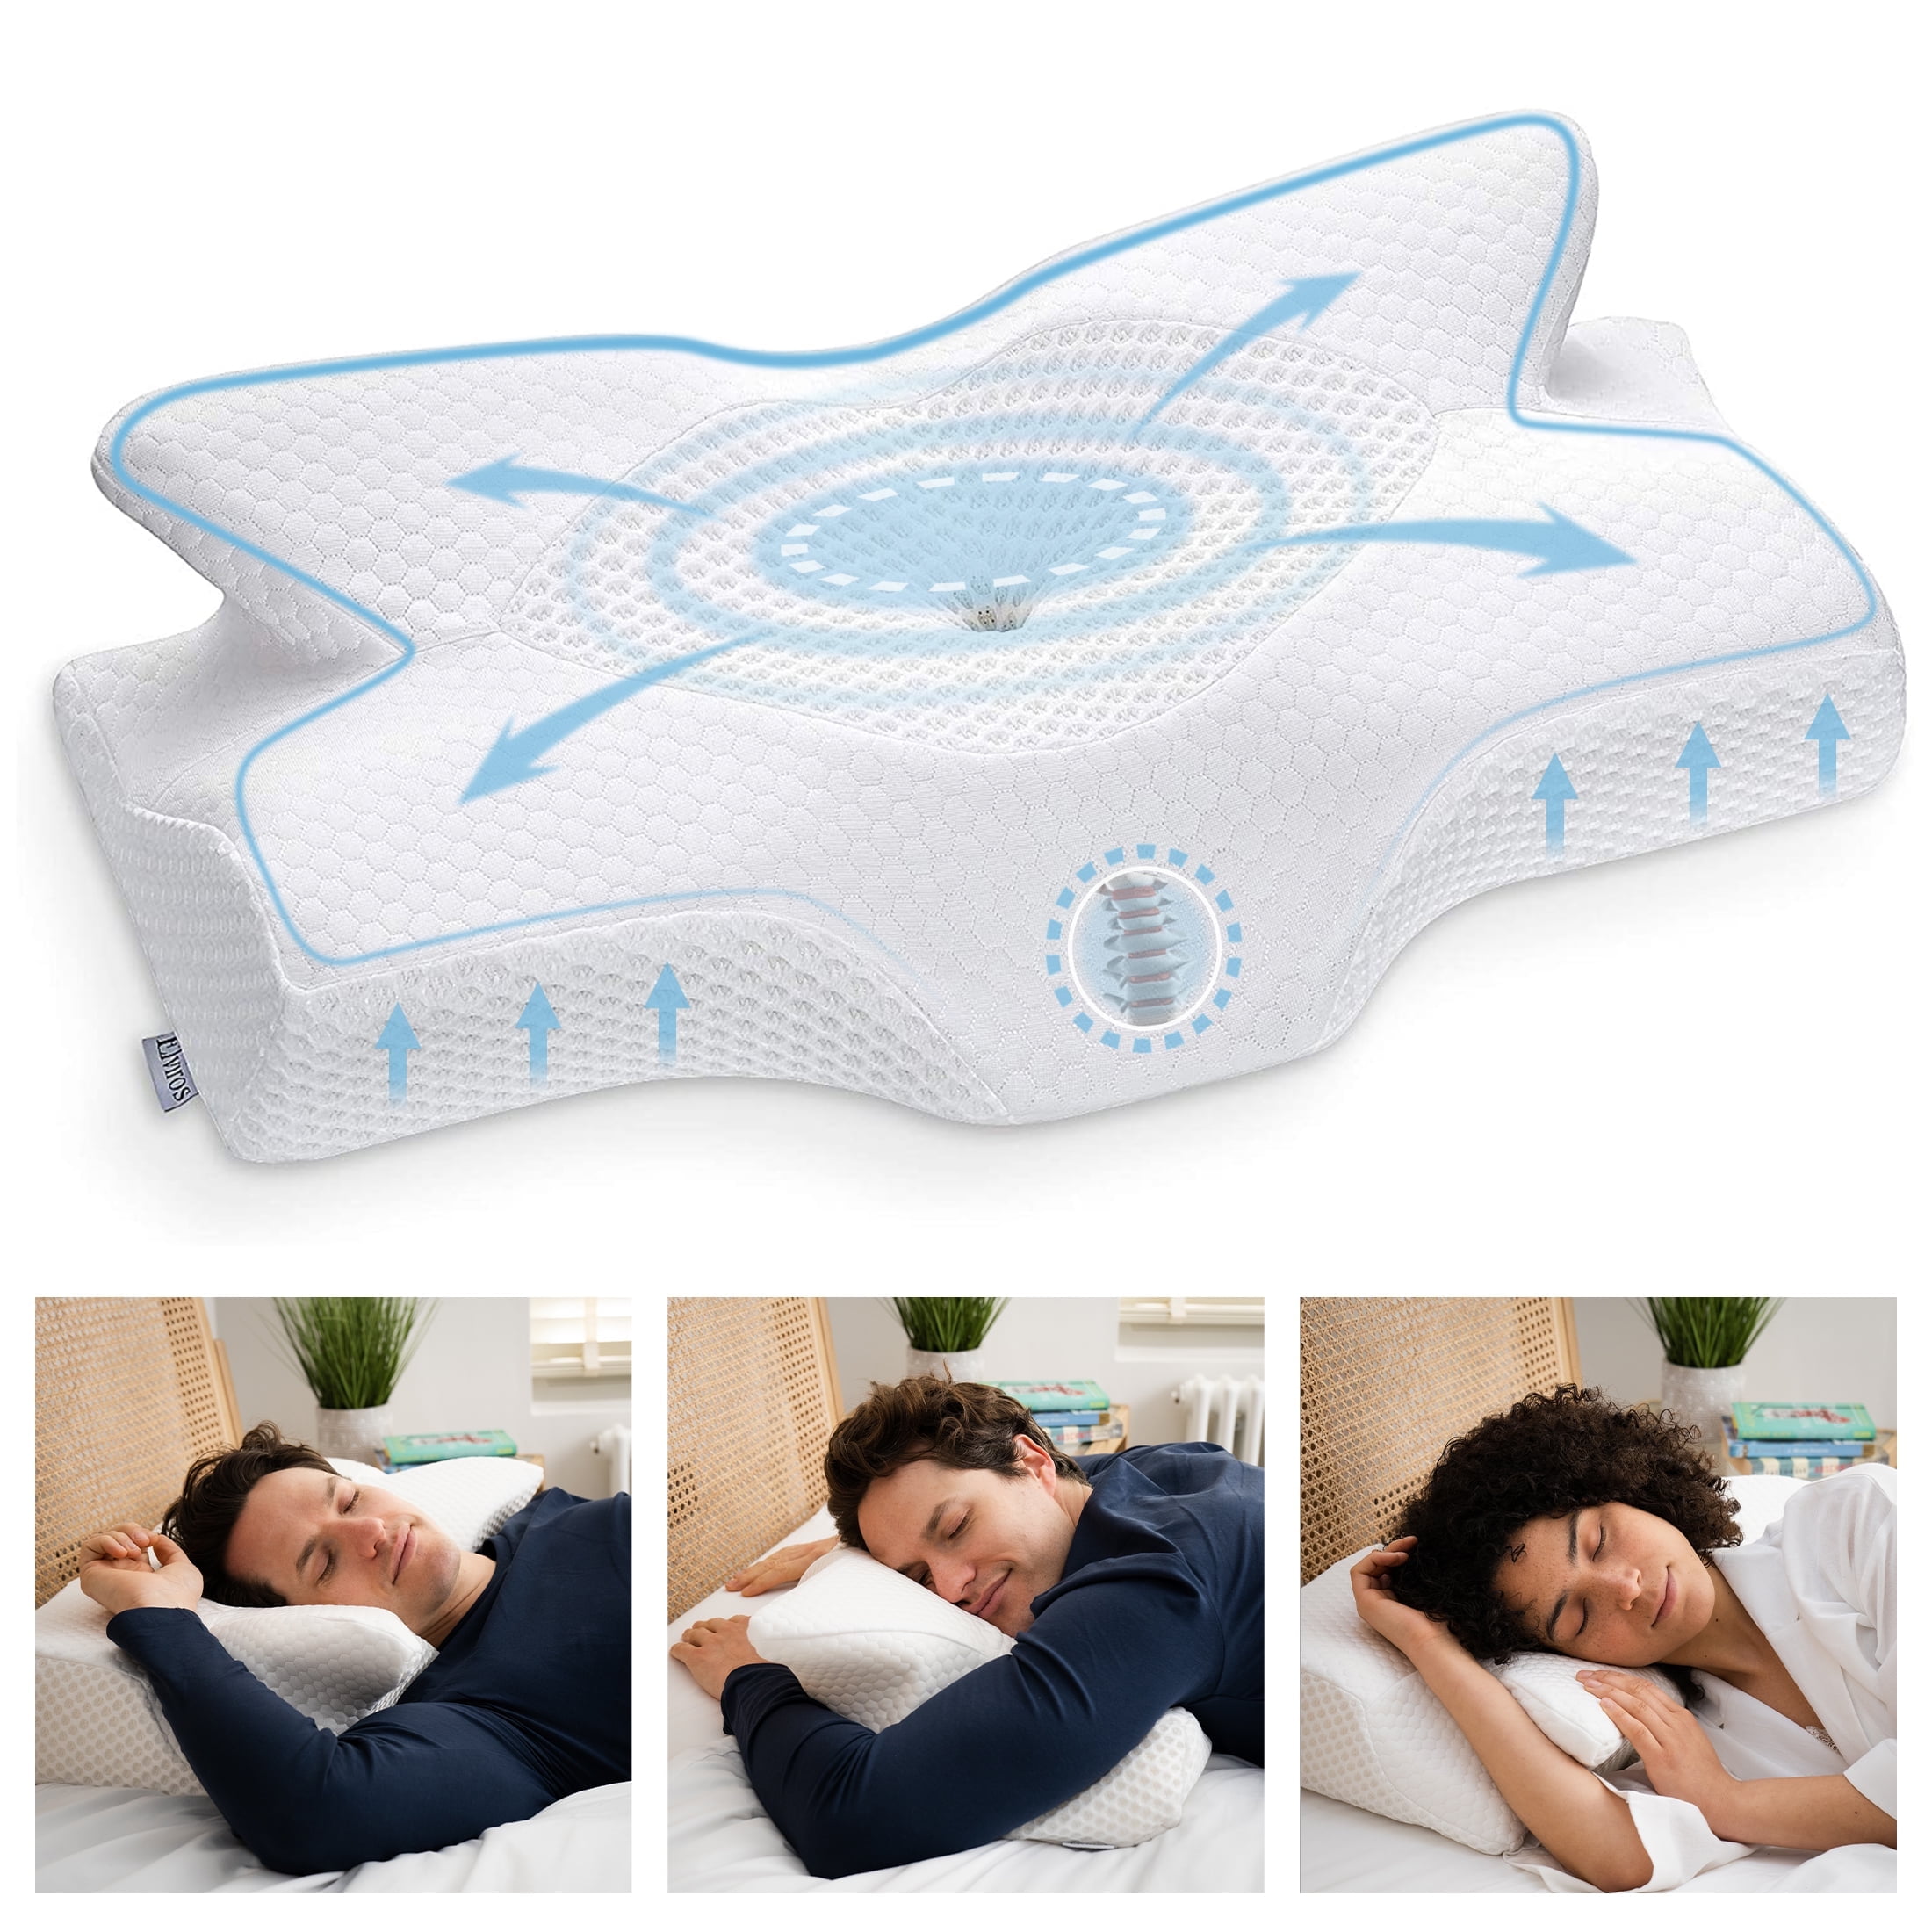 odfit Cervical Pillow for Pain Relief